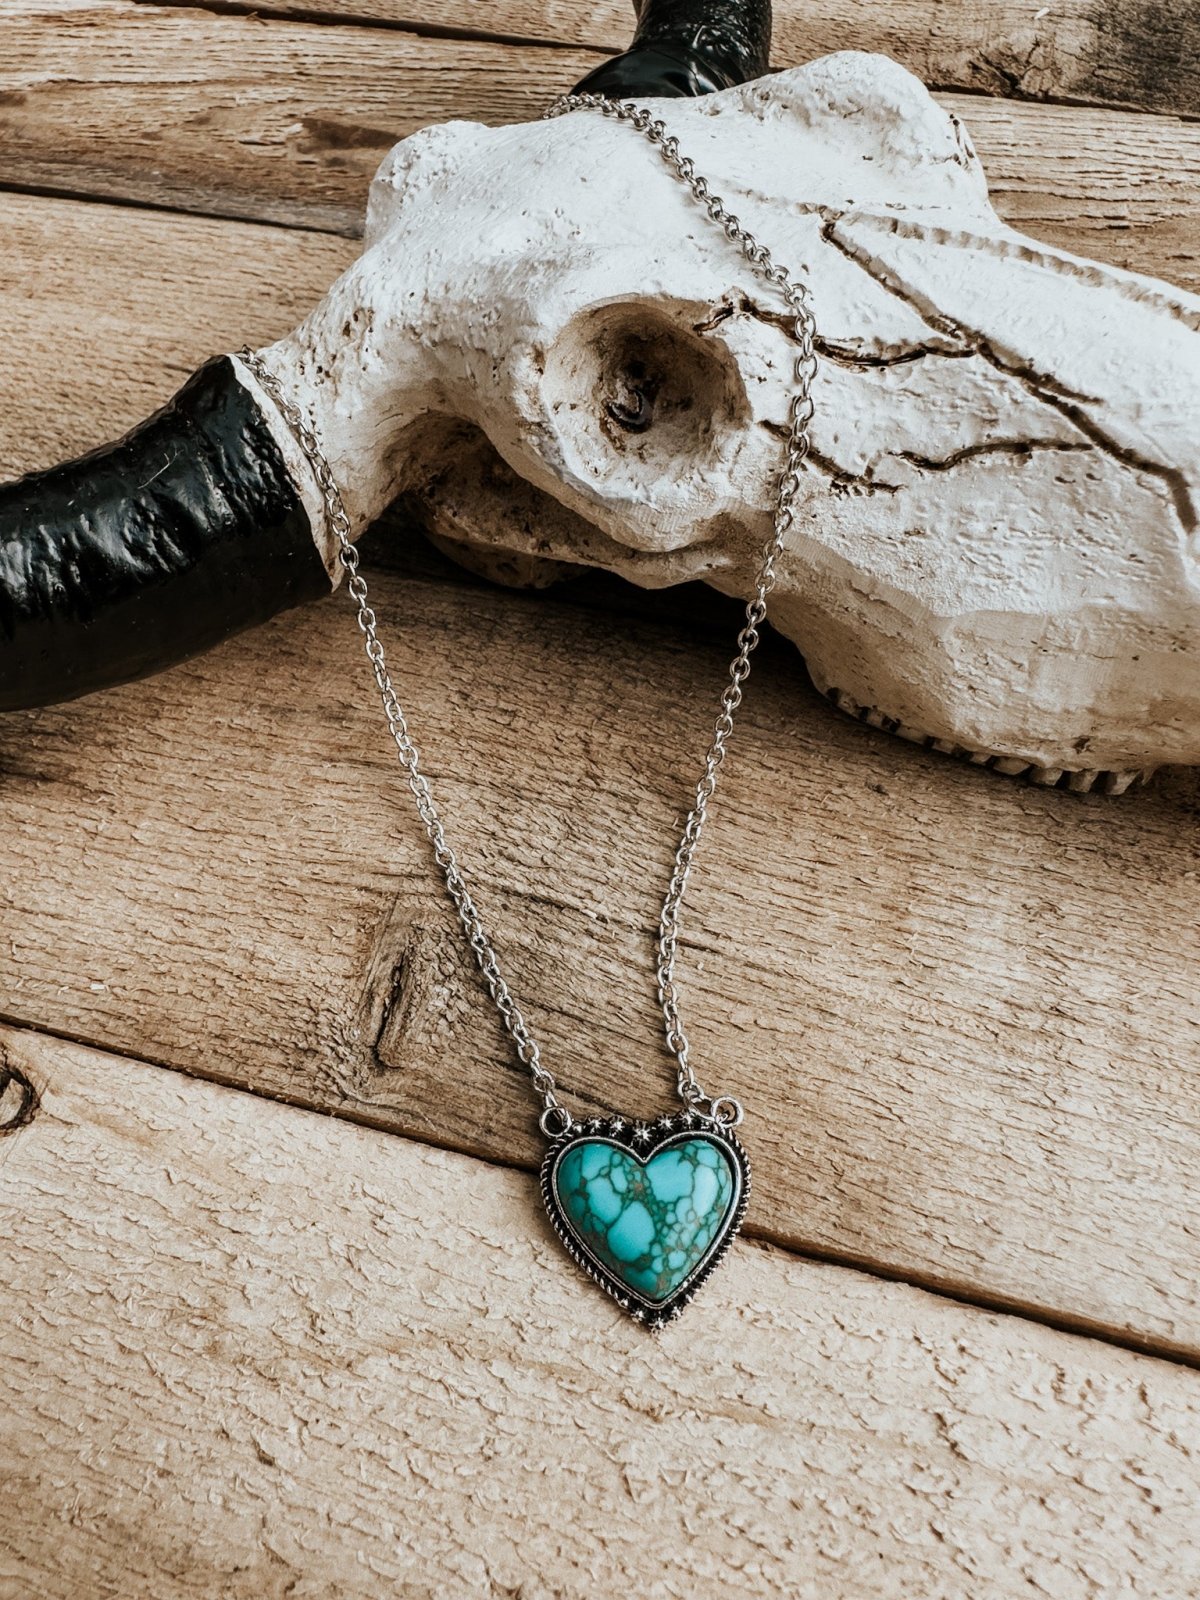 The Heart Necklace - necklace